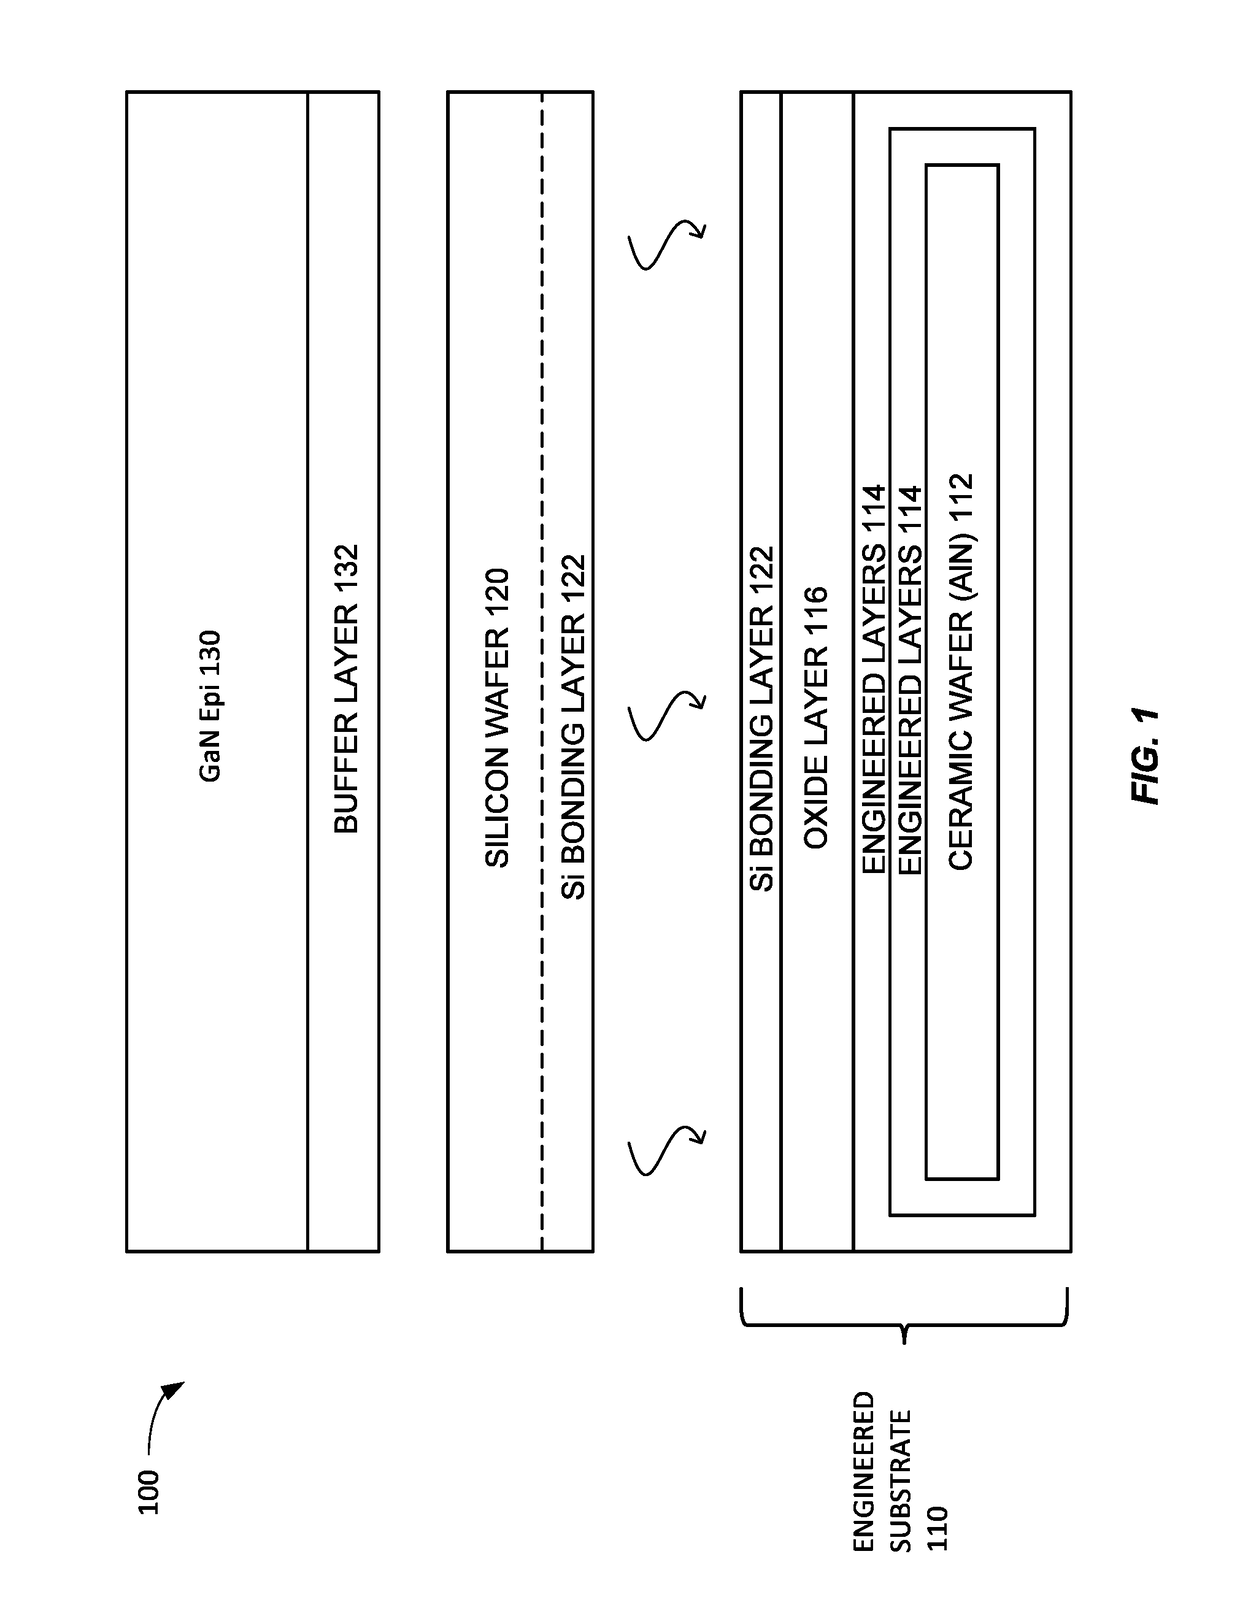 Wide band gap device integrated circuit architecture on engineered substrate